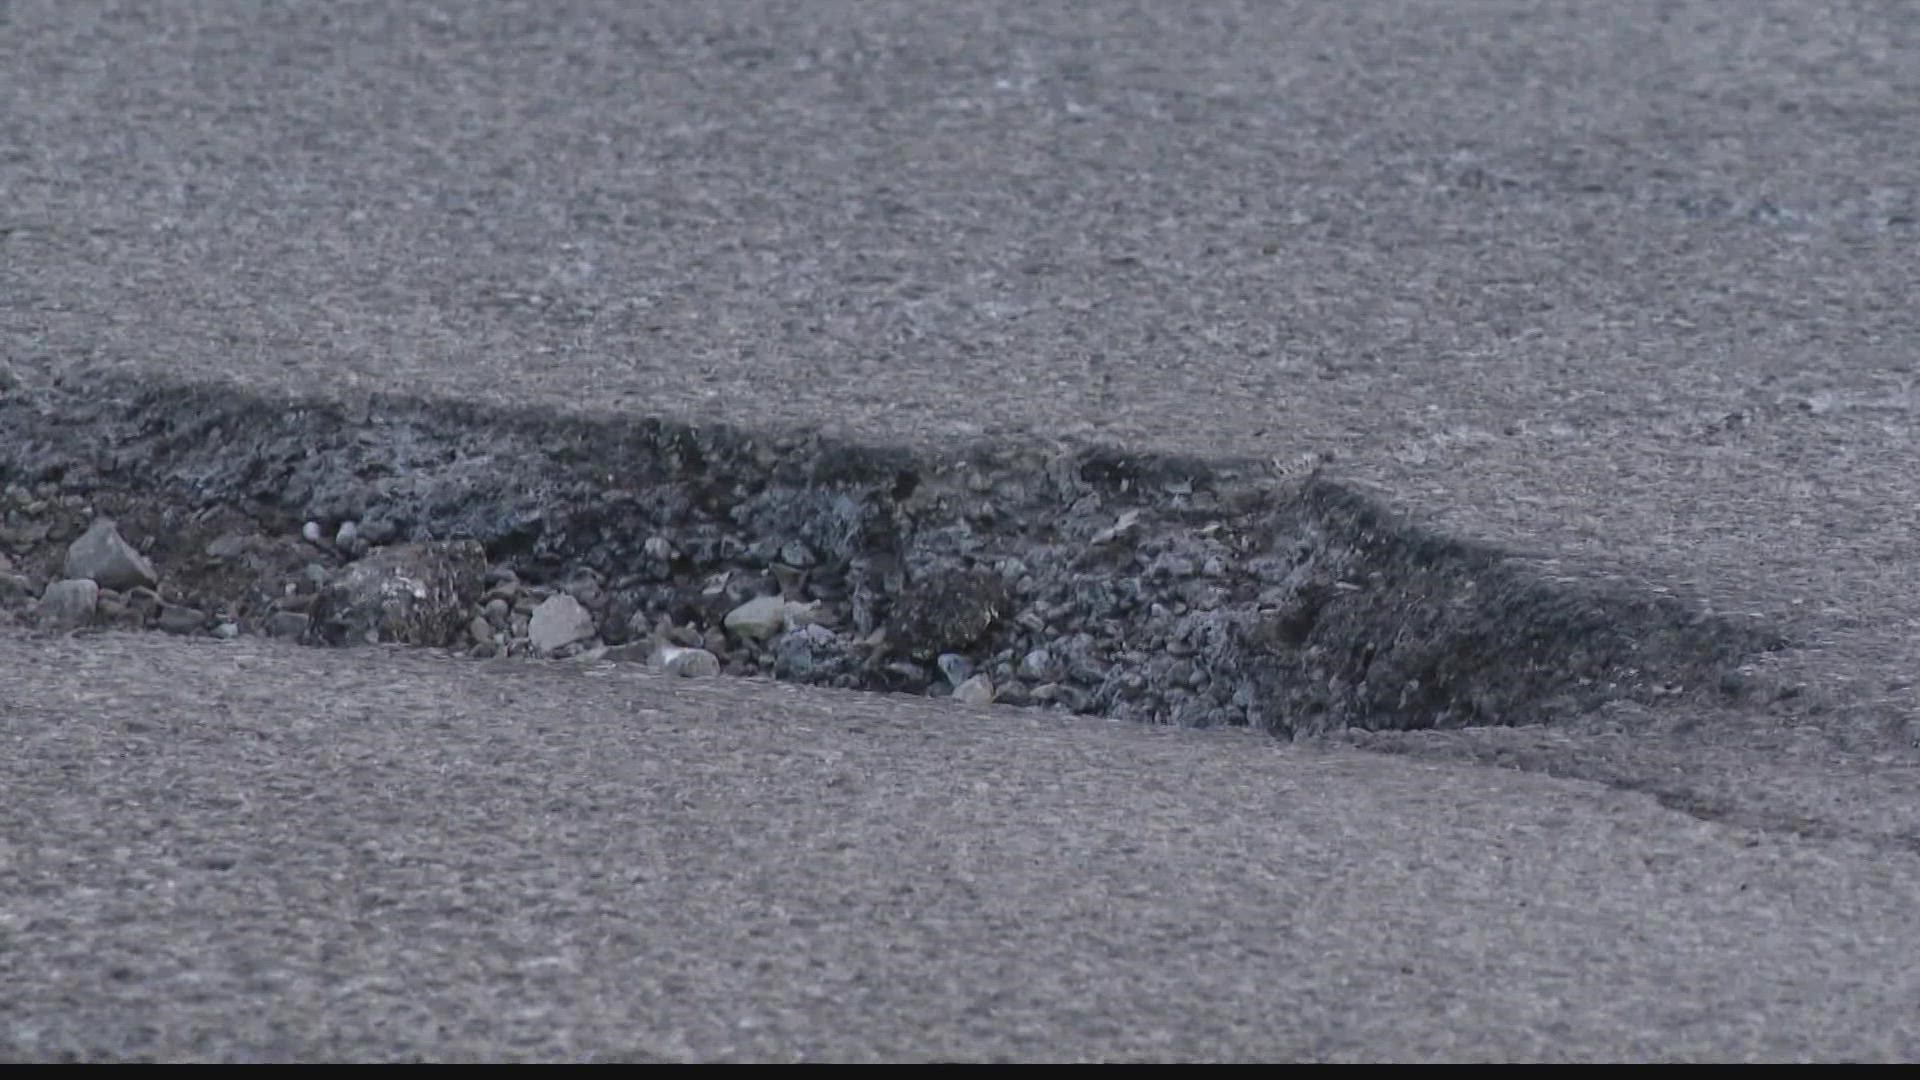 More than 4,300 potholes have been reported to city officials already this season.